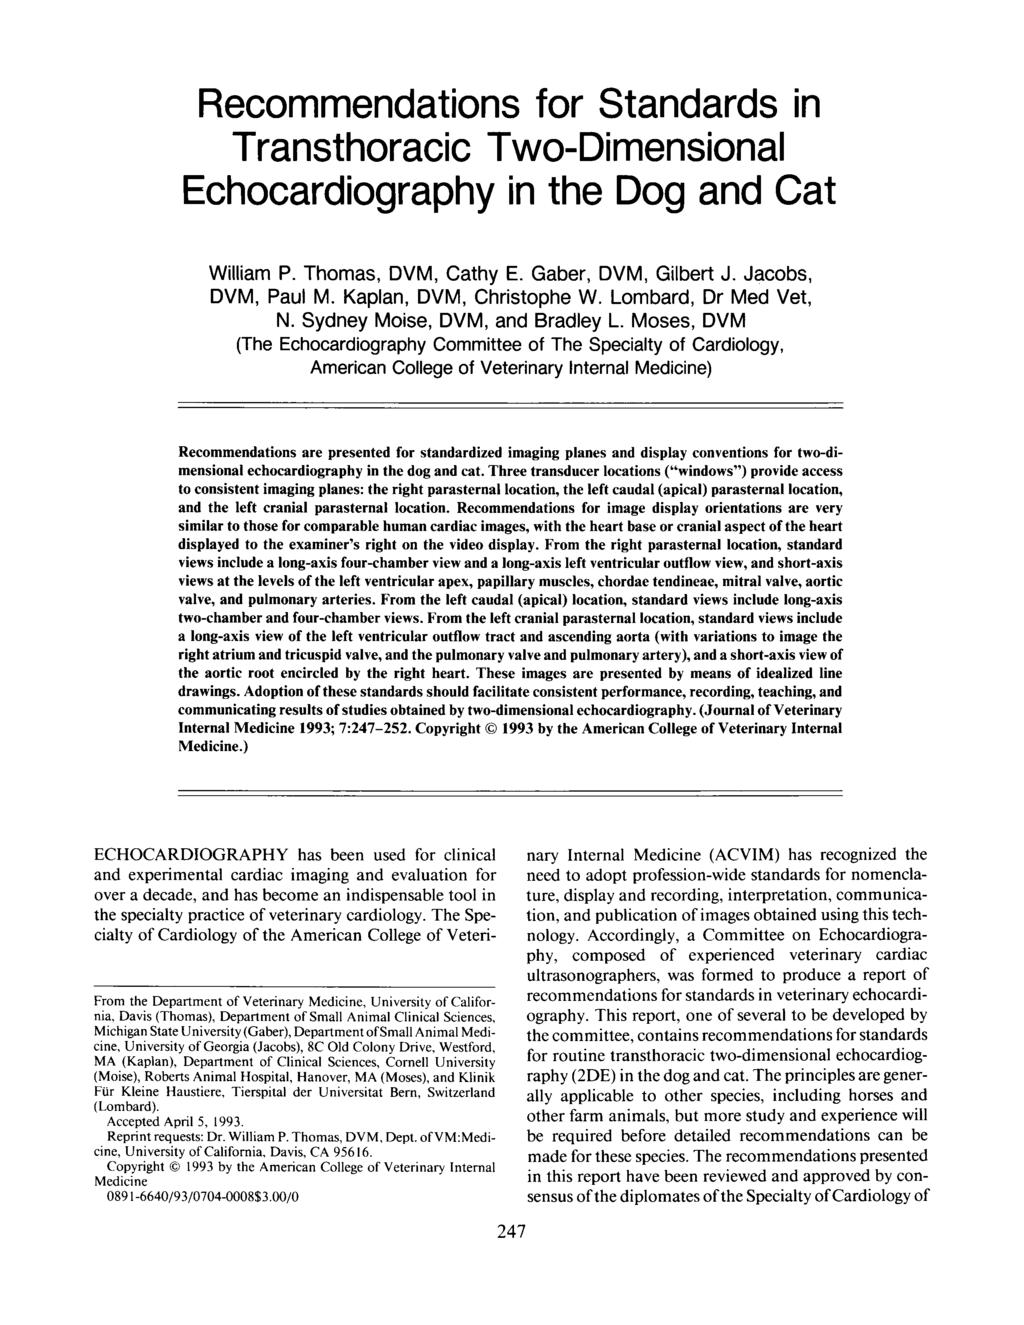 Recommendations for Standards in Transthoracic Two-Dimensional Echocardiography in the Dog and Cat William P. Thomas, DVM, Cathy E. Gaber, DVM, Gilbert J. Jacobs, DVM, Paul M.